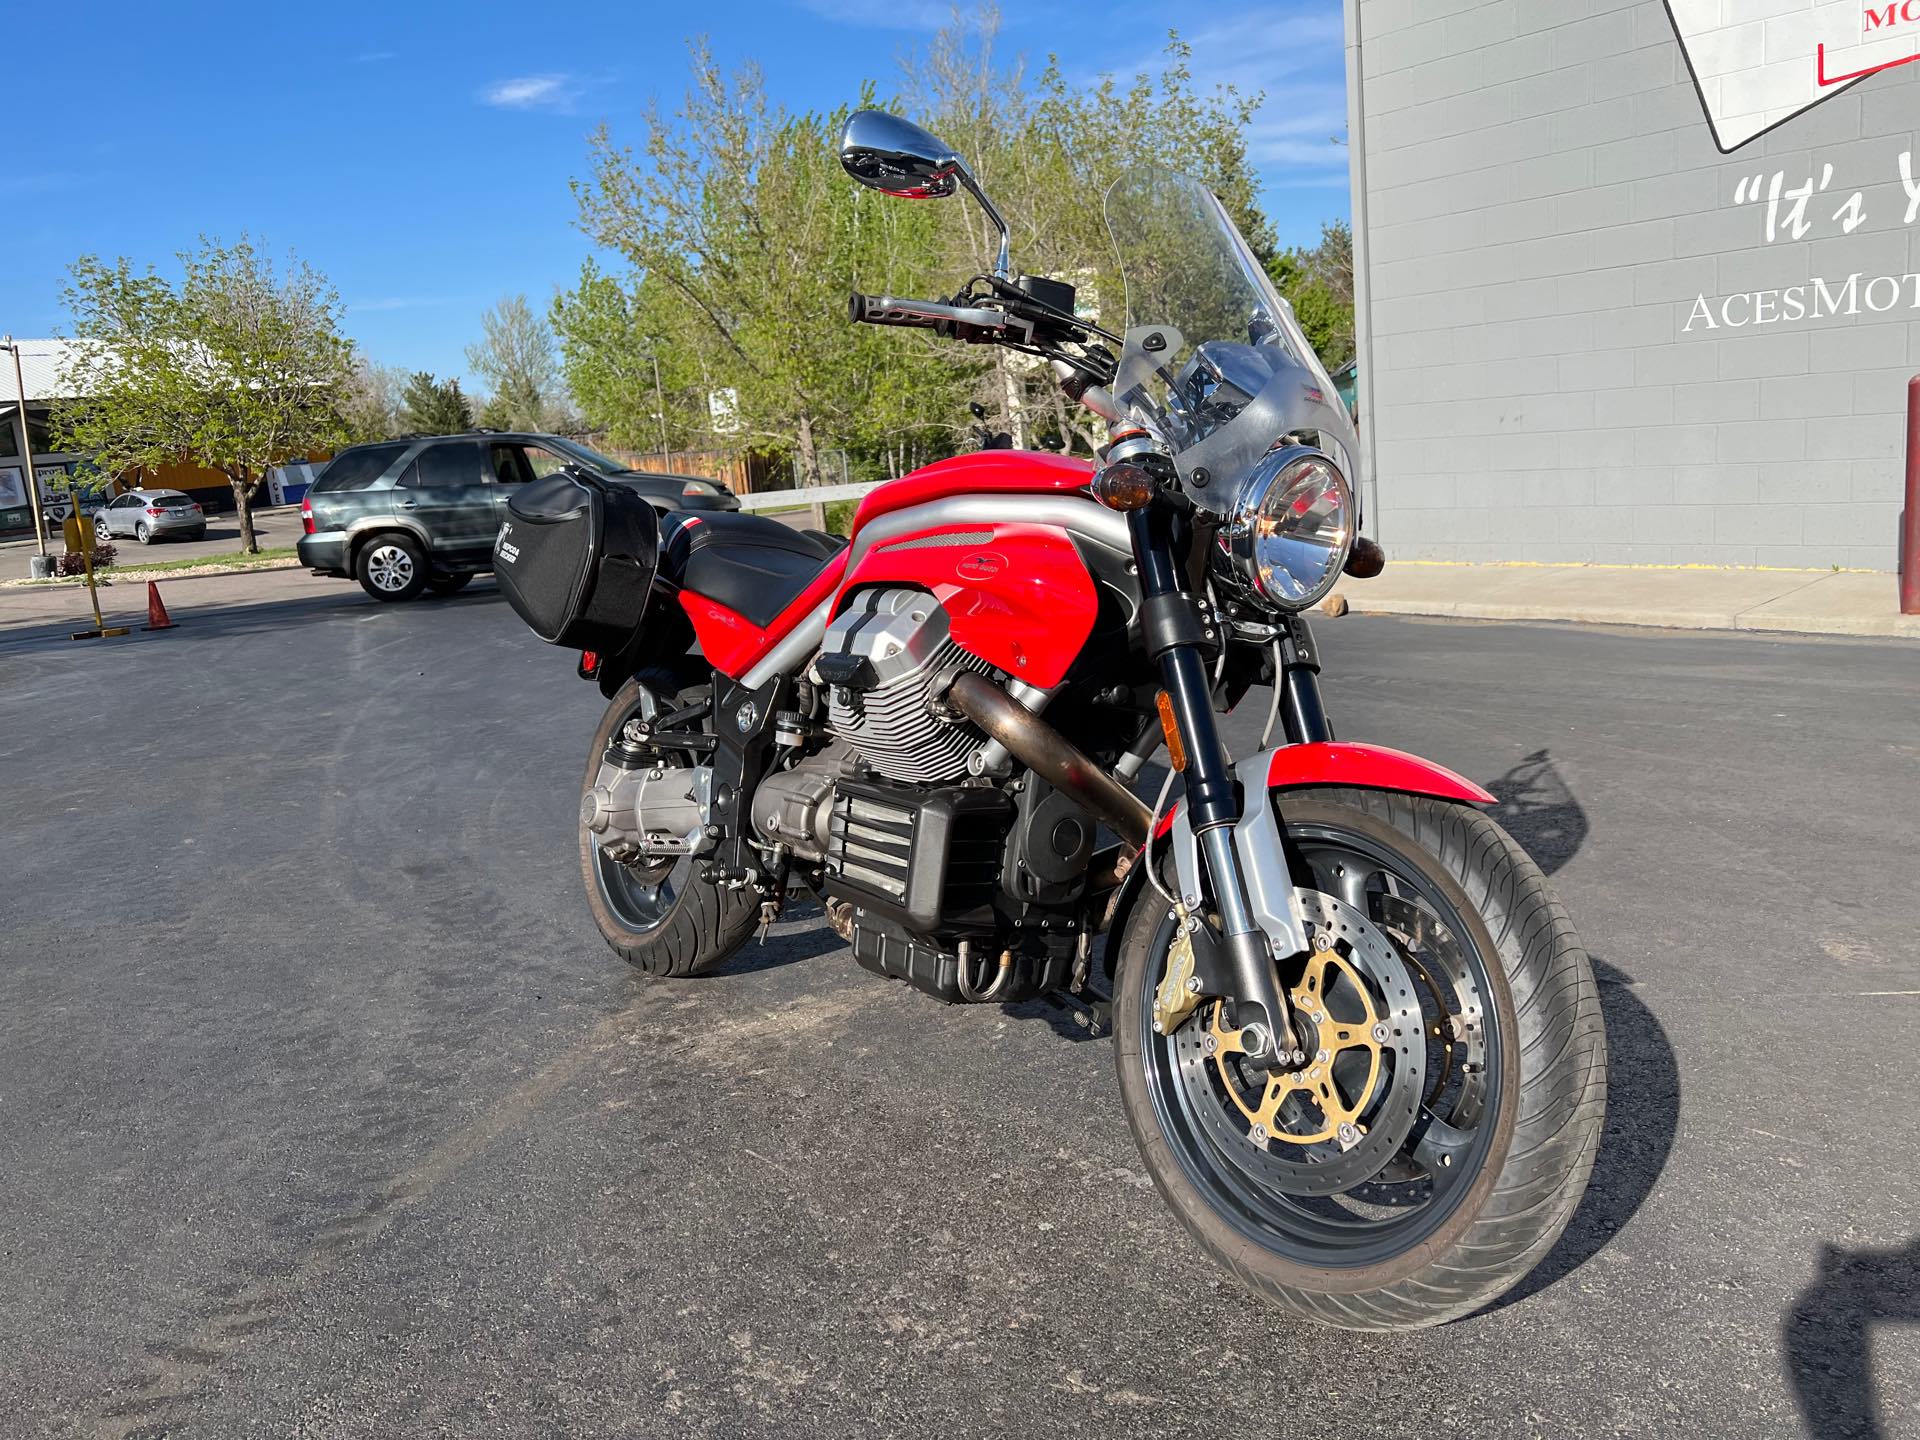 2007 Moto Guzzi Griso 1100 at Aces Motorcycles - Fort Collins